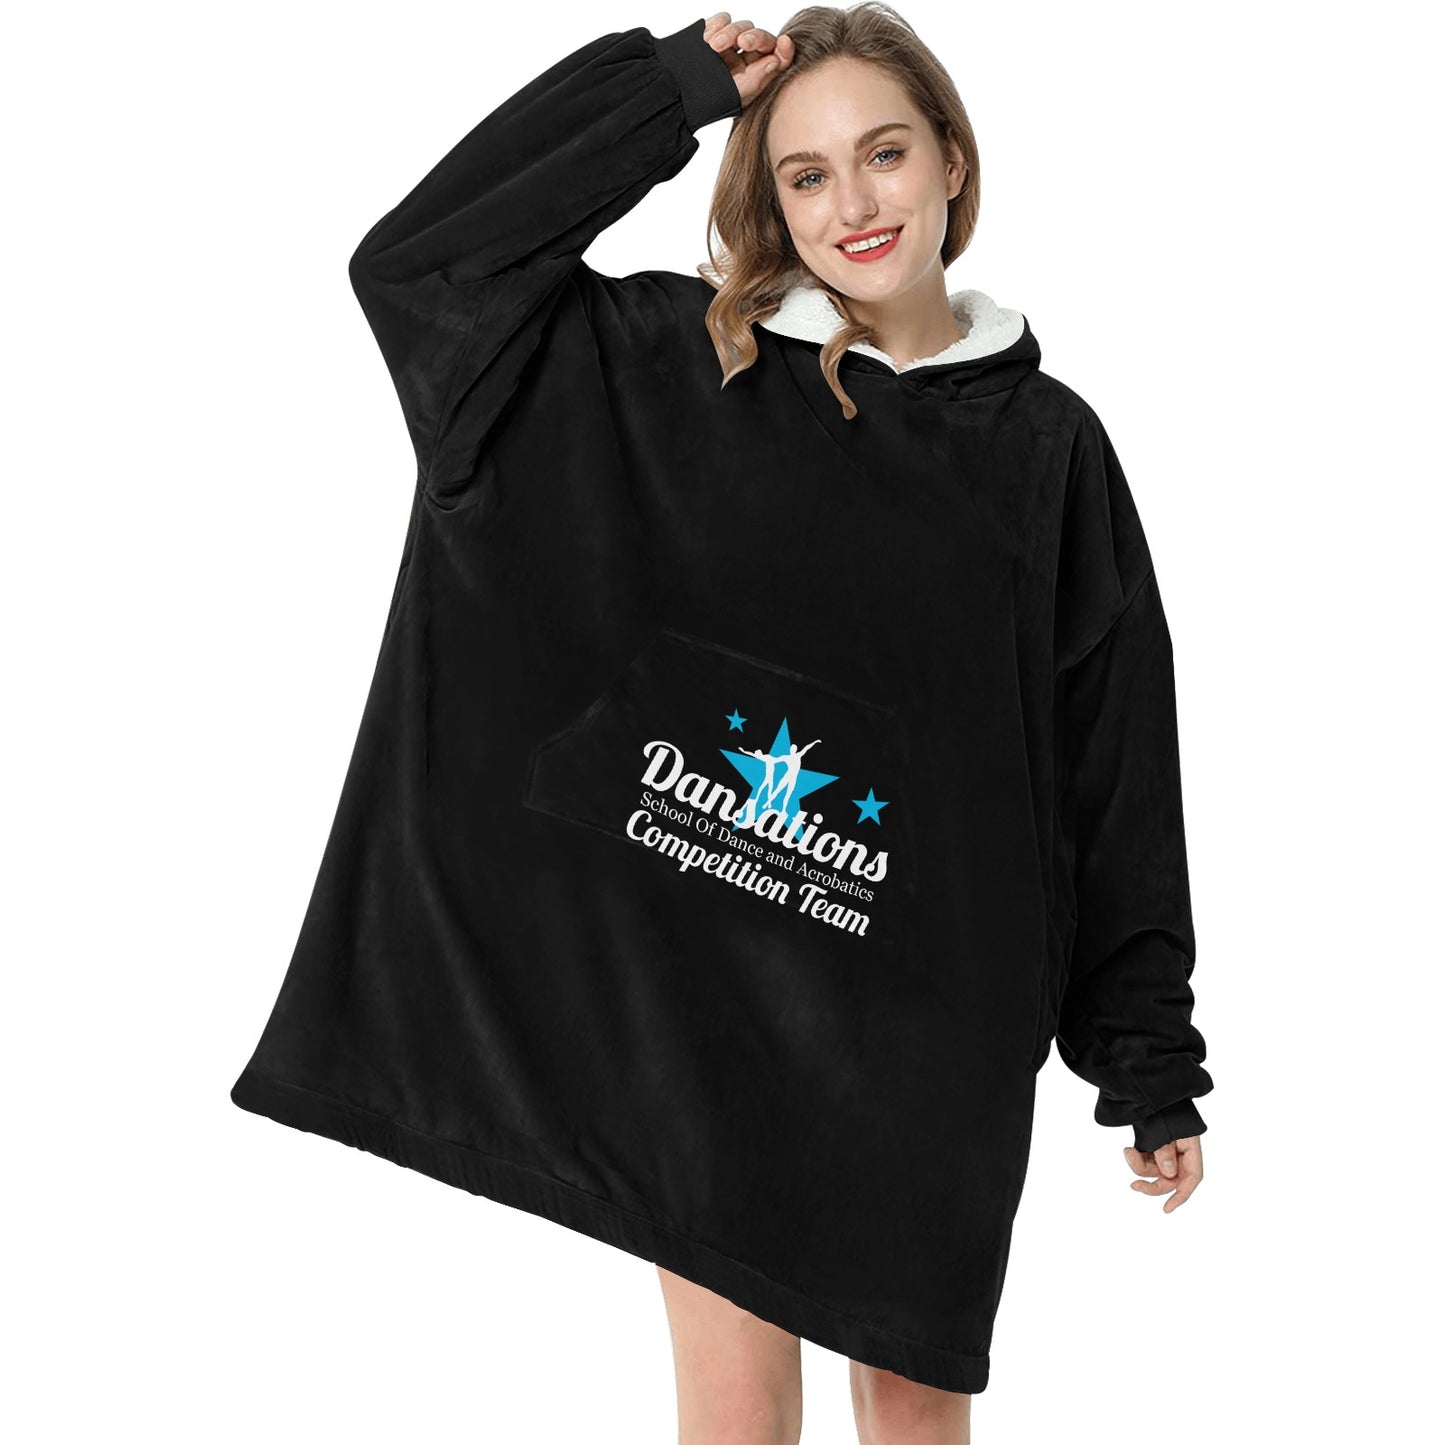 Dansations Competition Team Blanket Hoodie for Women